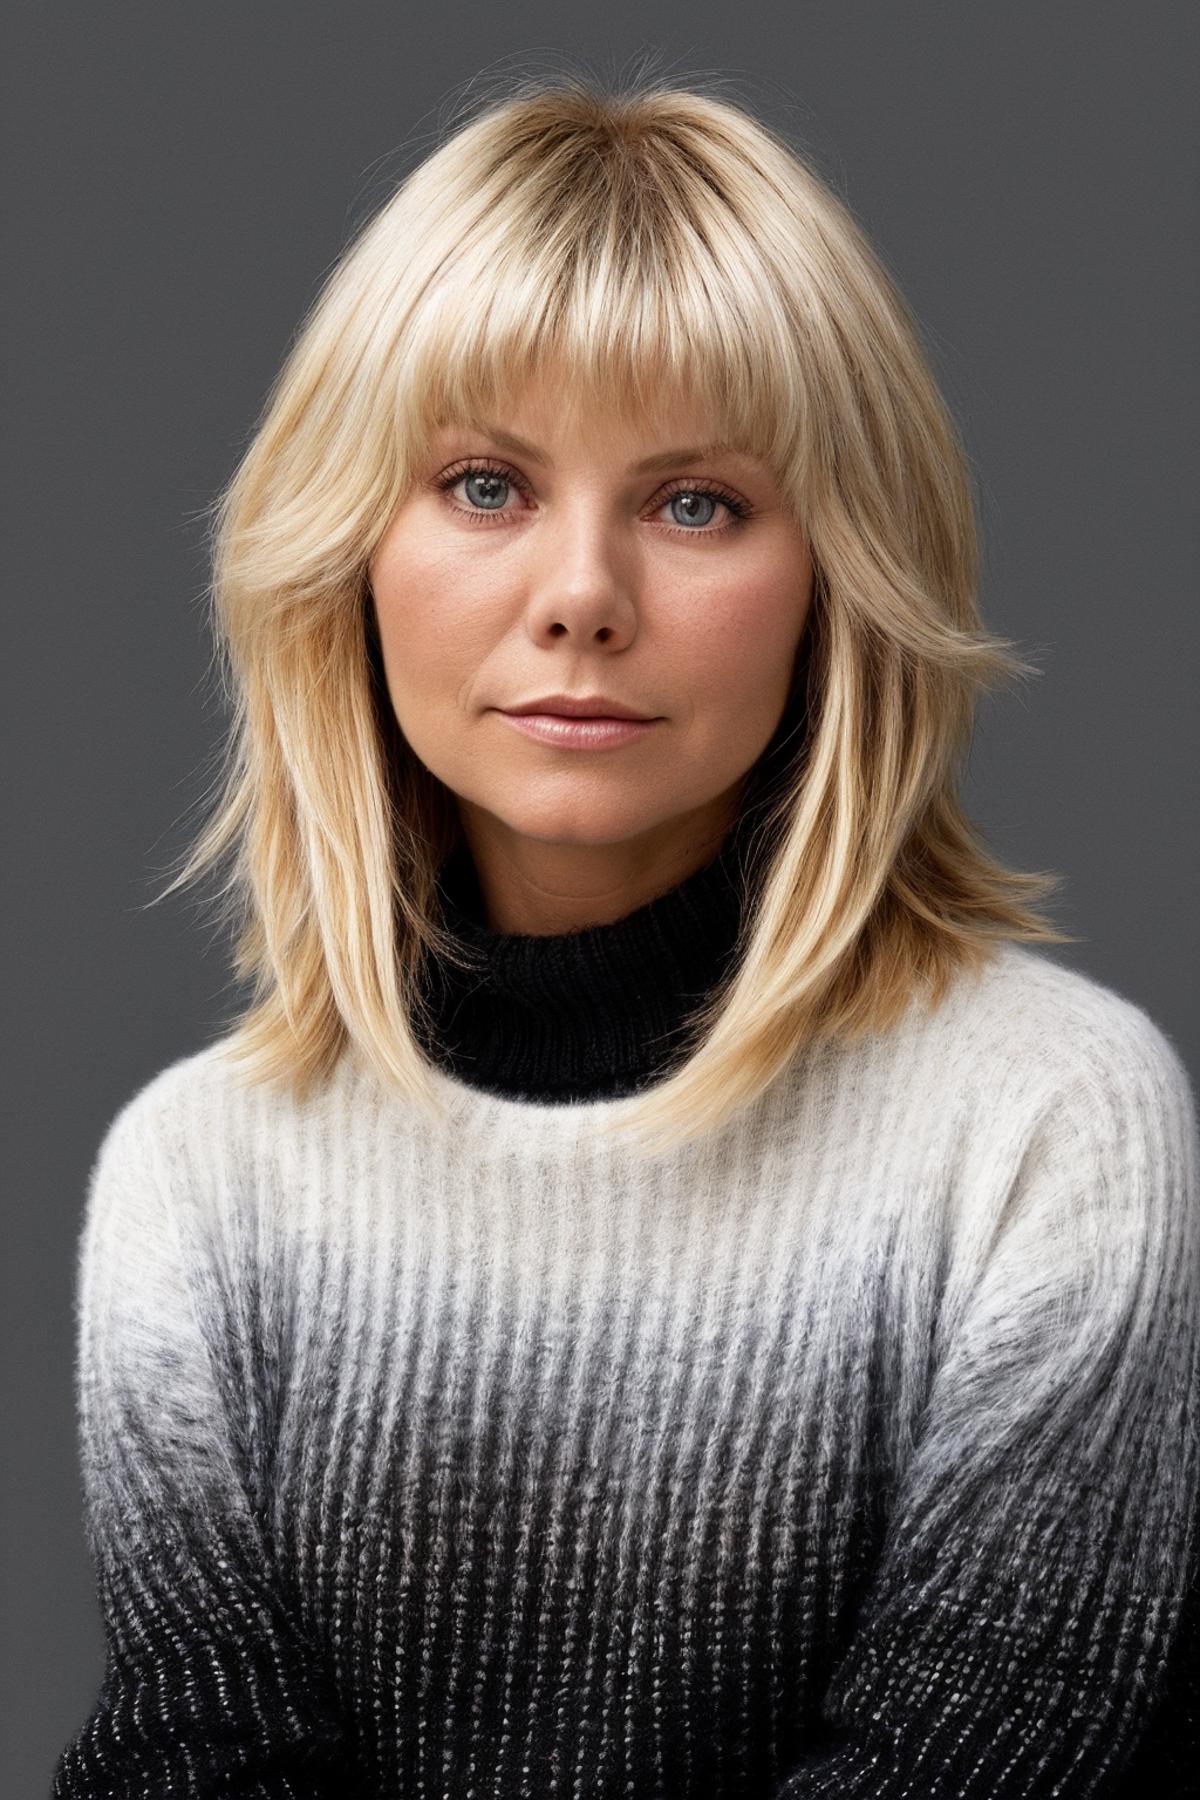 Glynis Barber (Dempsey and Makepeace) image by dbst17